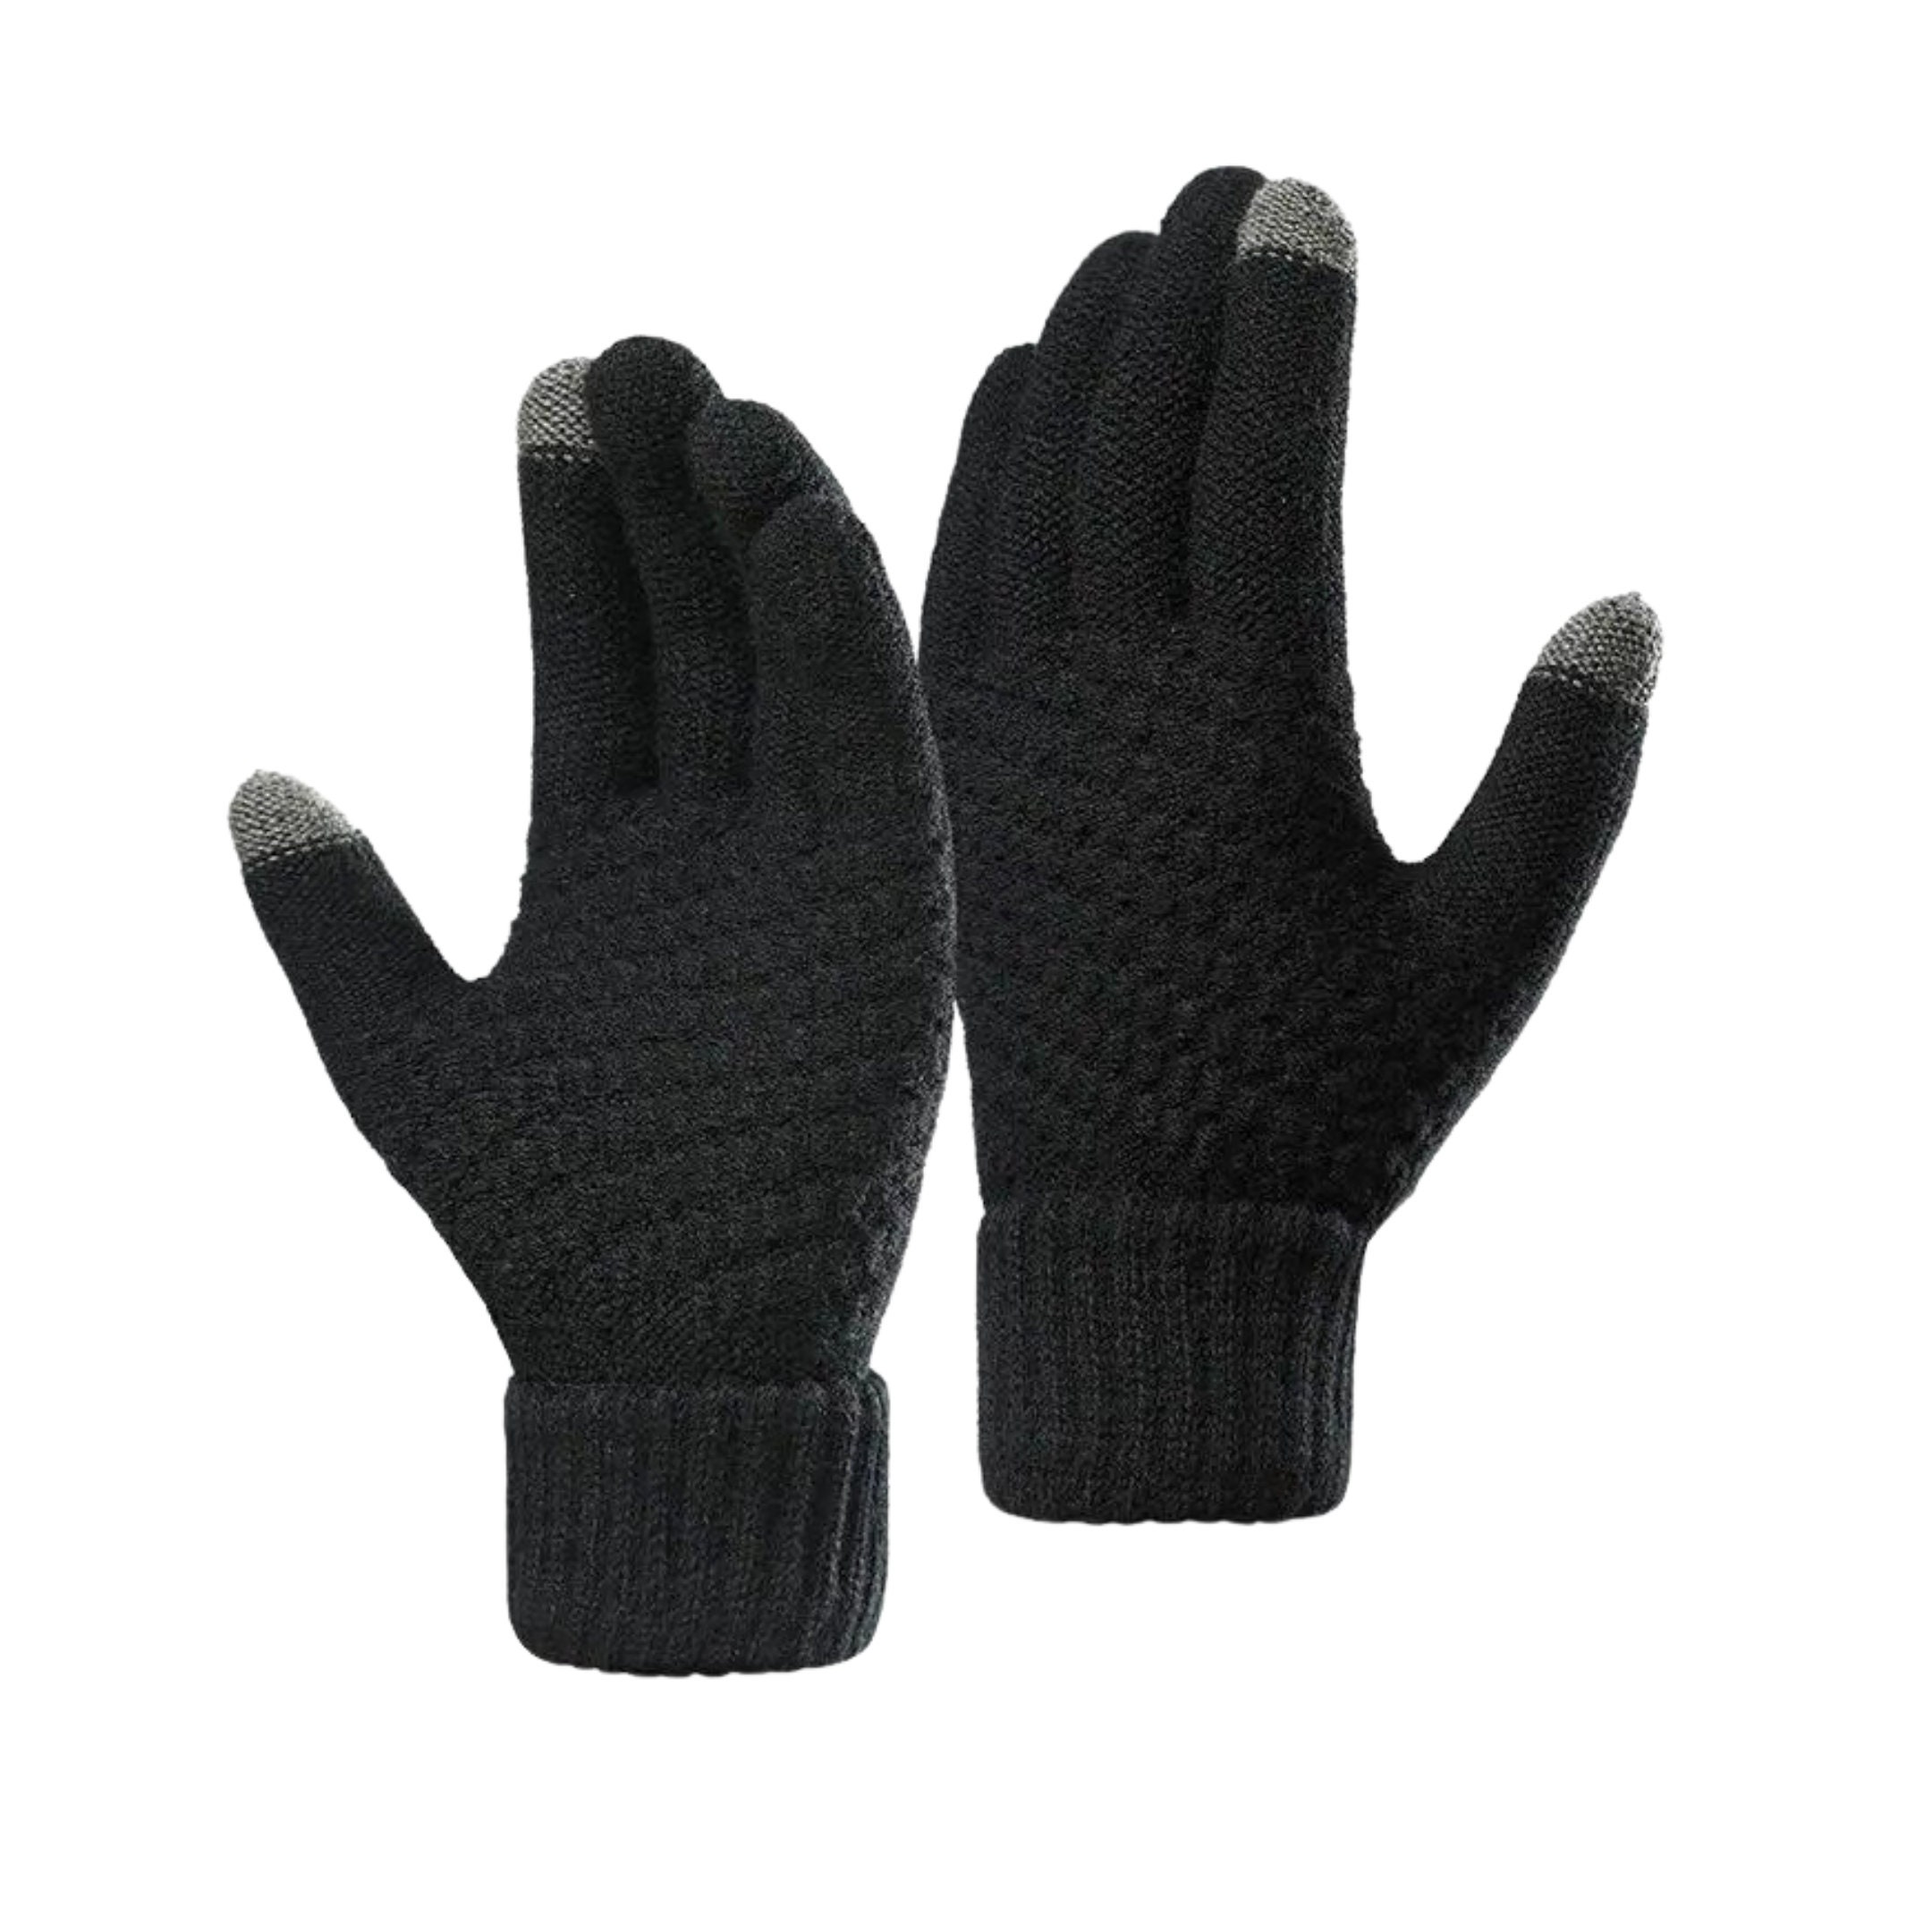 Revolution Artist Glove for Tablets and Touch Surfaces apple Ipad,  Microsoft, Samsung, Wacom, Etc. 